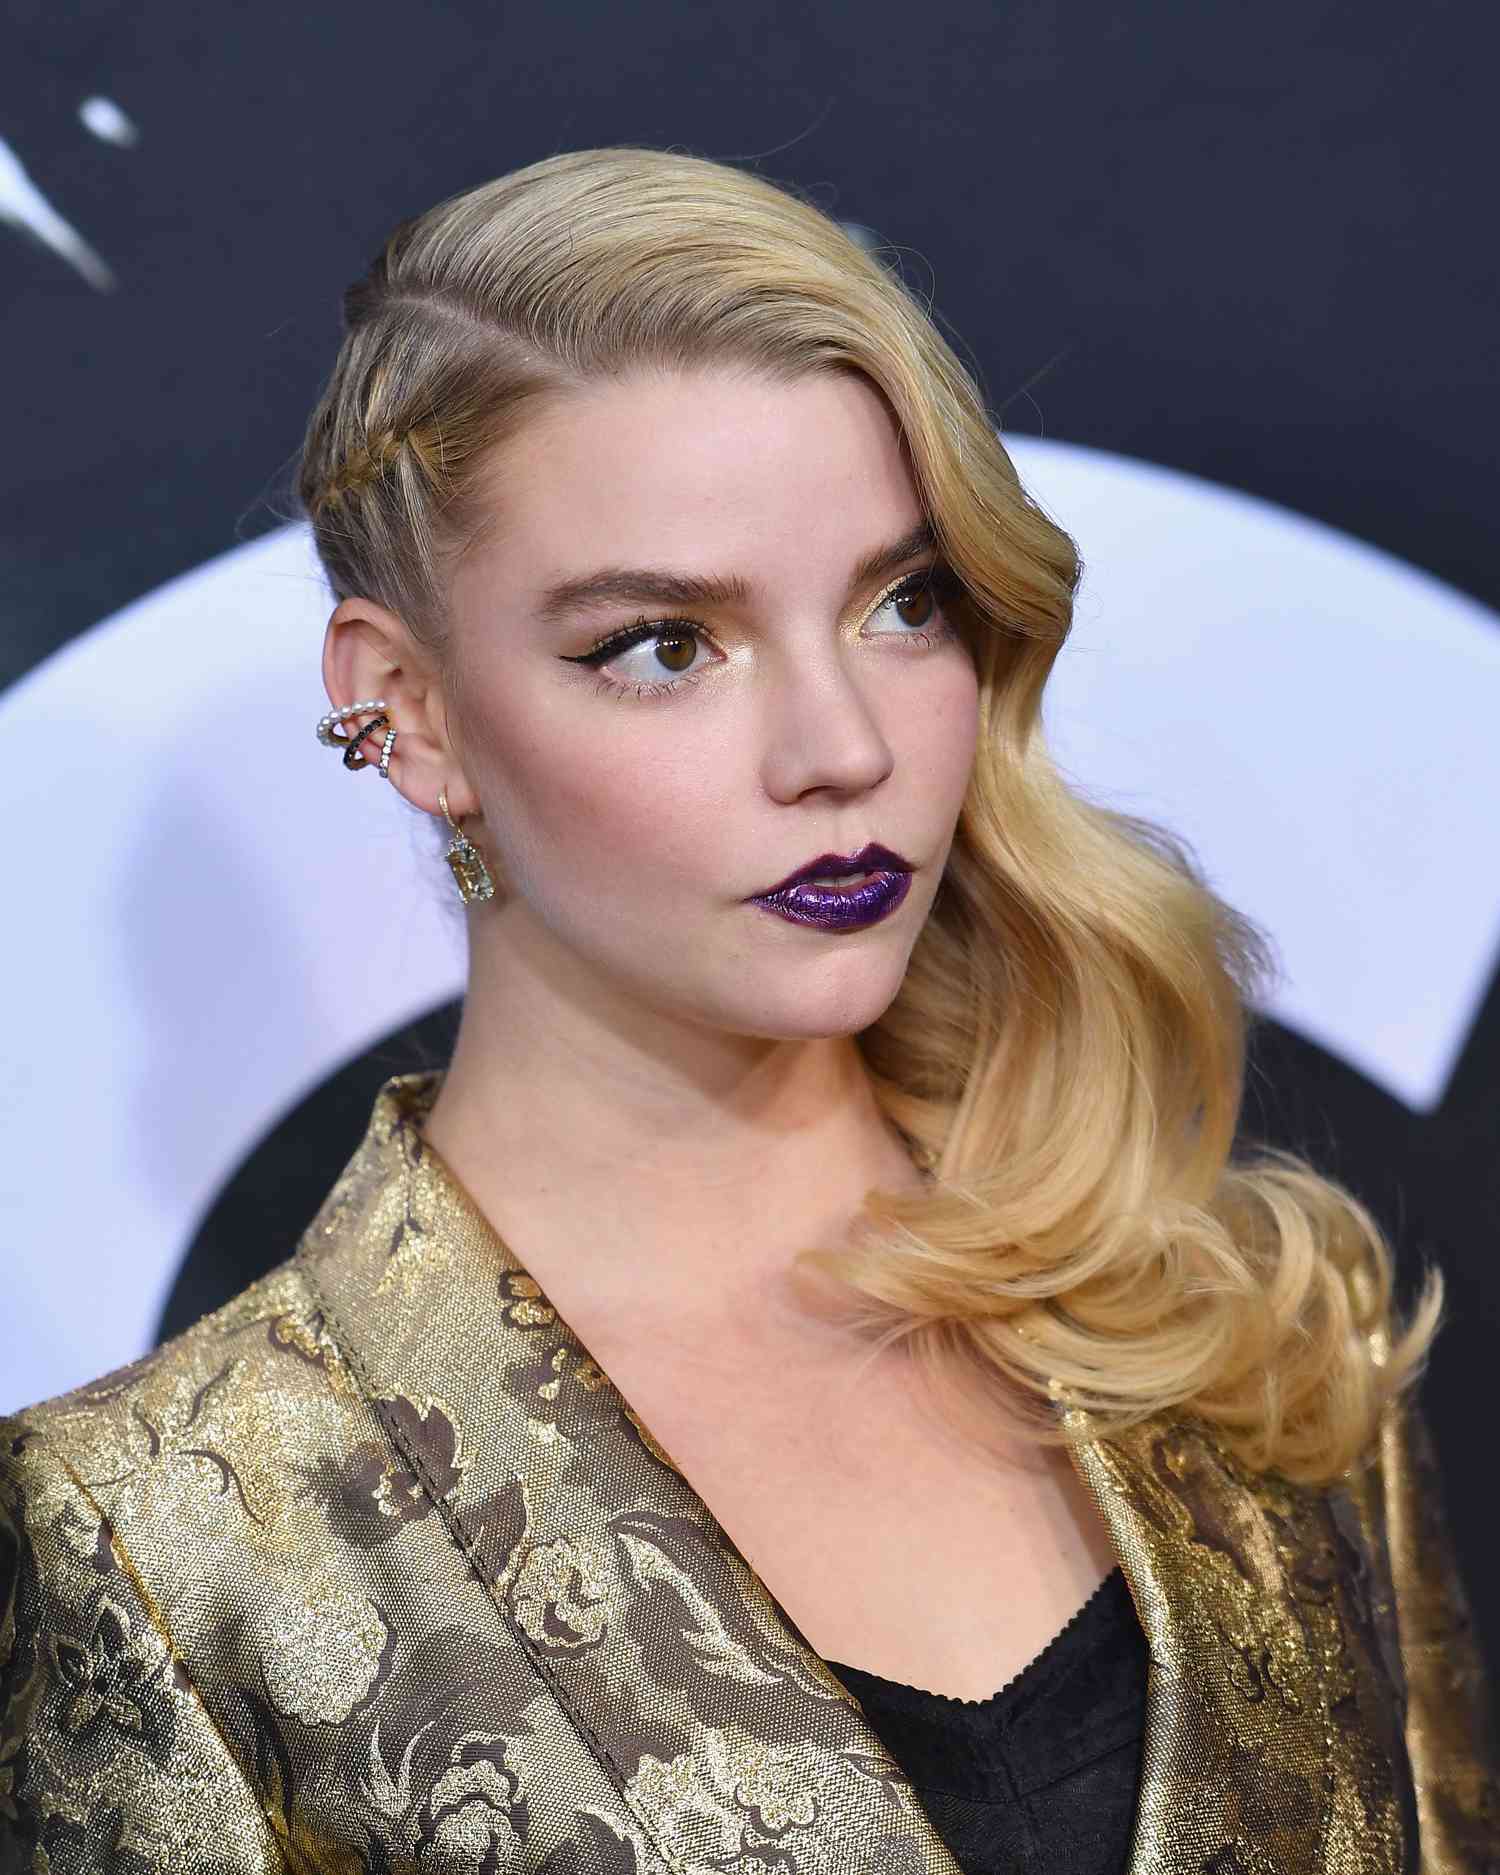 Anya Taylor-Joy with a deep side part, waves on one side of her head and a braid on the other